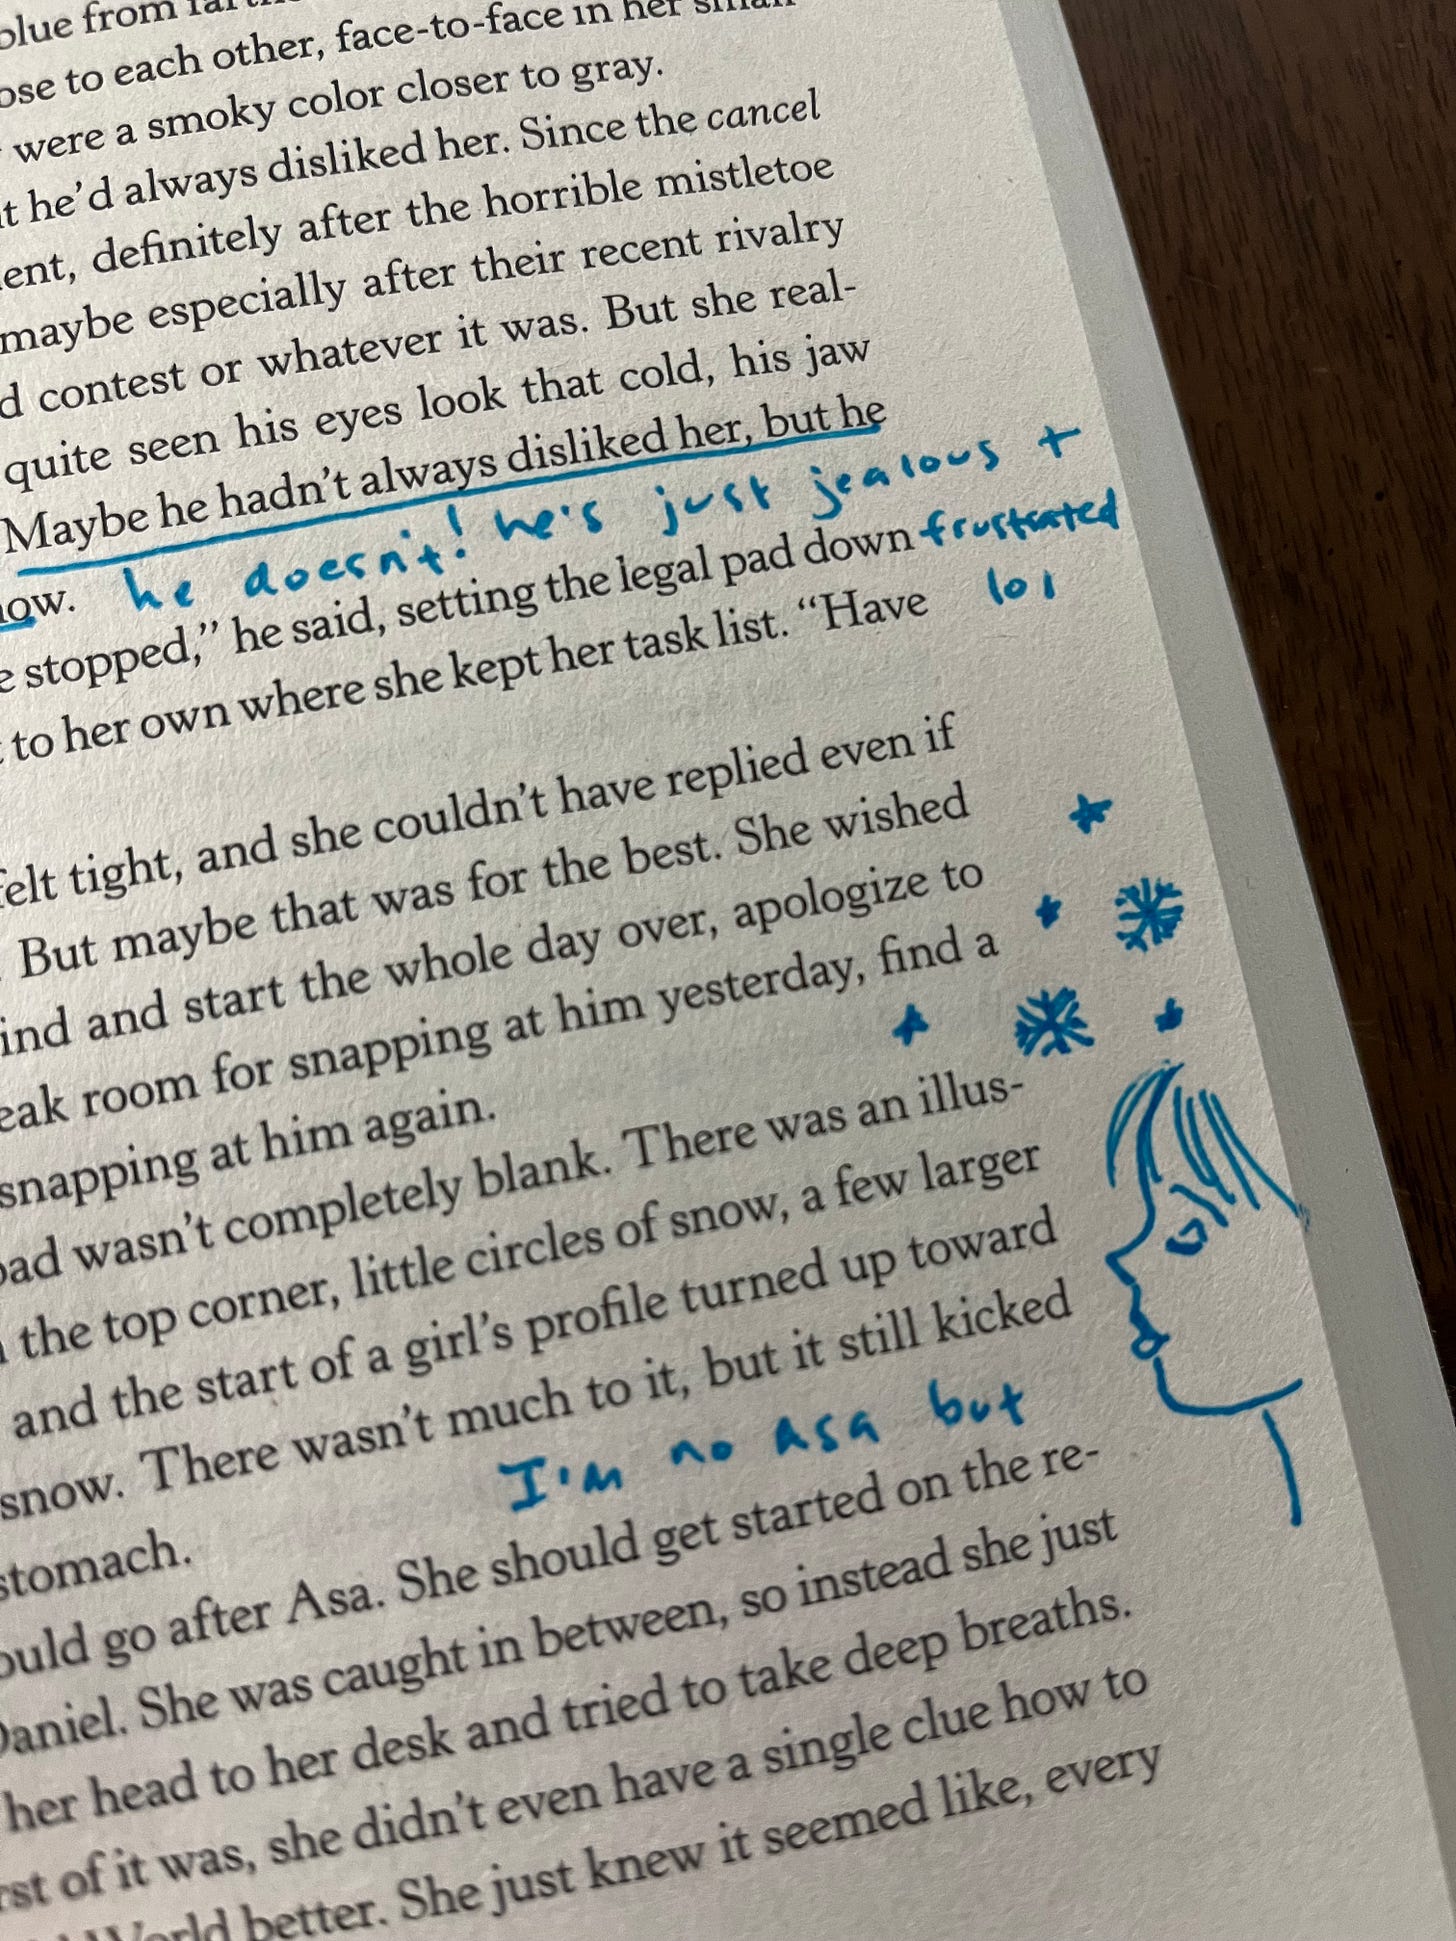 Picture of page from With Love, from Cold World, with a line underlined "Maybe he hadn't always disliked her..." and then I wrote in blue ink "he doesn't! he's just jealous and frustrated lol" and then next to a part about Asa's little drawing of a girl's profile looking up at snow I made my attempts to draw it lol